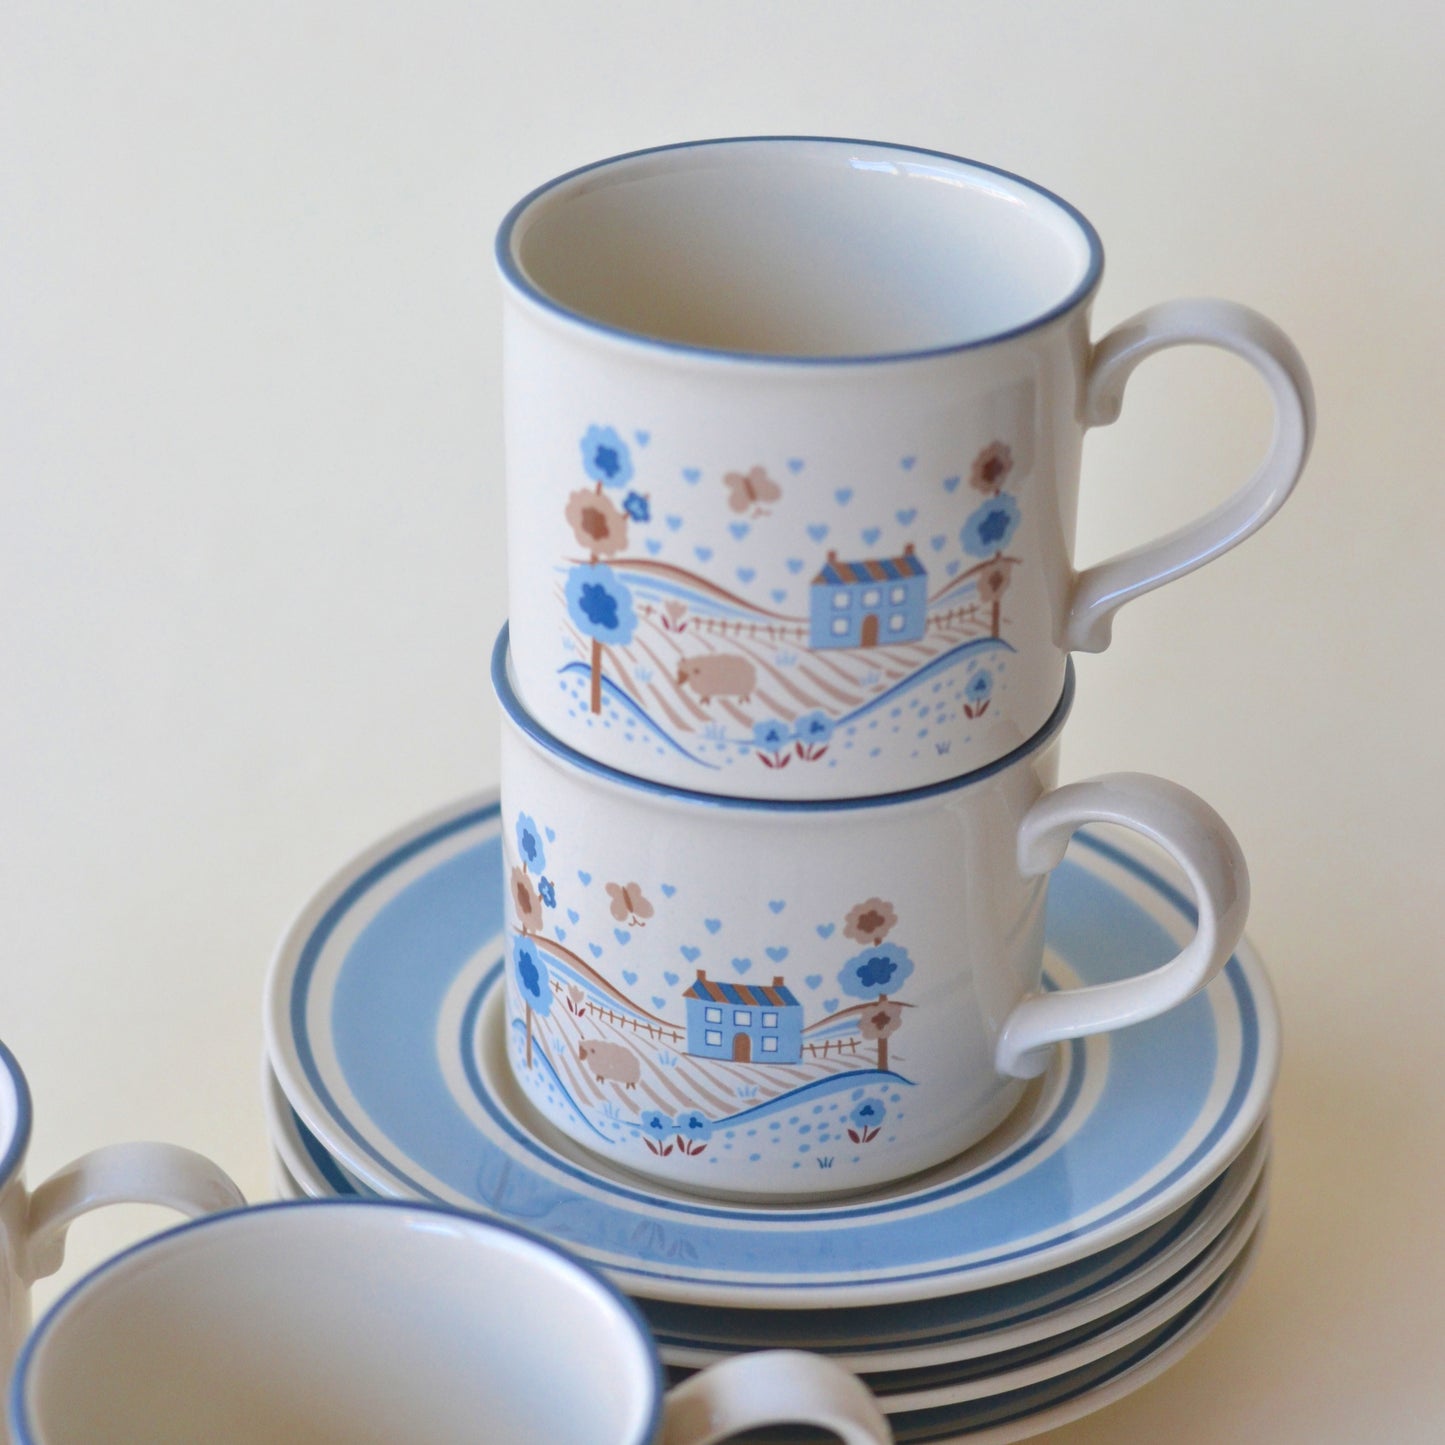 Quaint Country Mugs and Plates, Set of 4